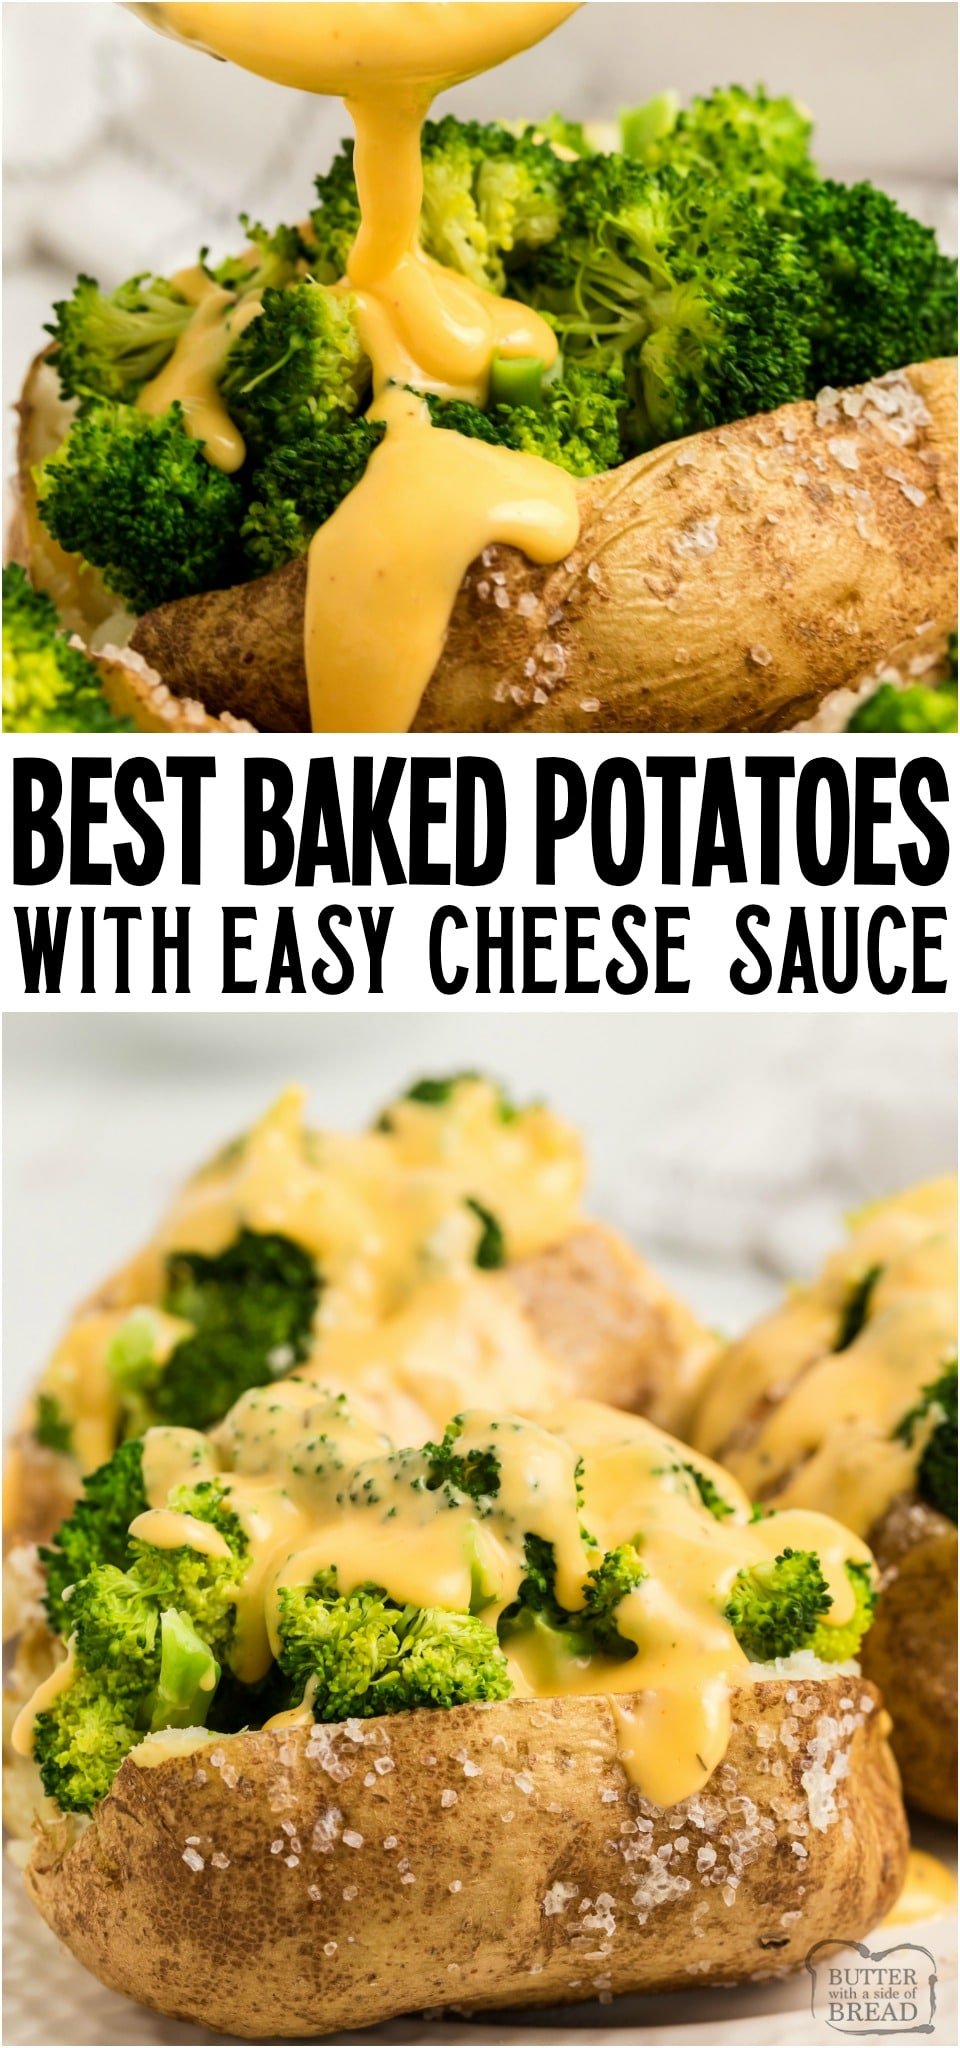 Baked Potatoes with Broccoli and an Amazing Cheese Sauce is the perfect family-friendly meatless main dish. Best recipe for baked potatoes and you'll go crazy over the cheese sauce- it's incredible!